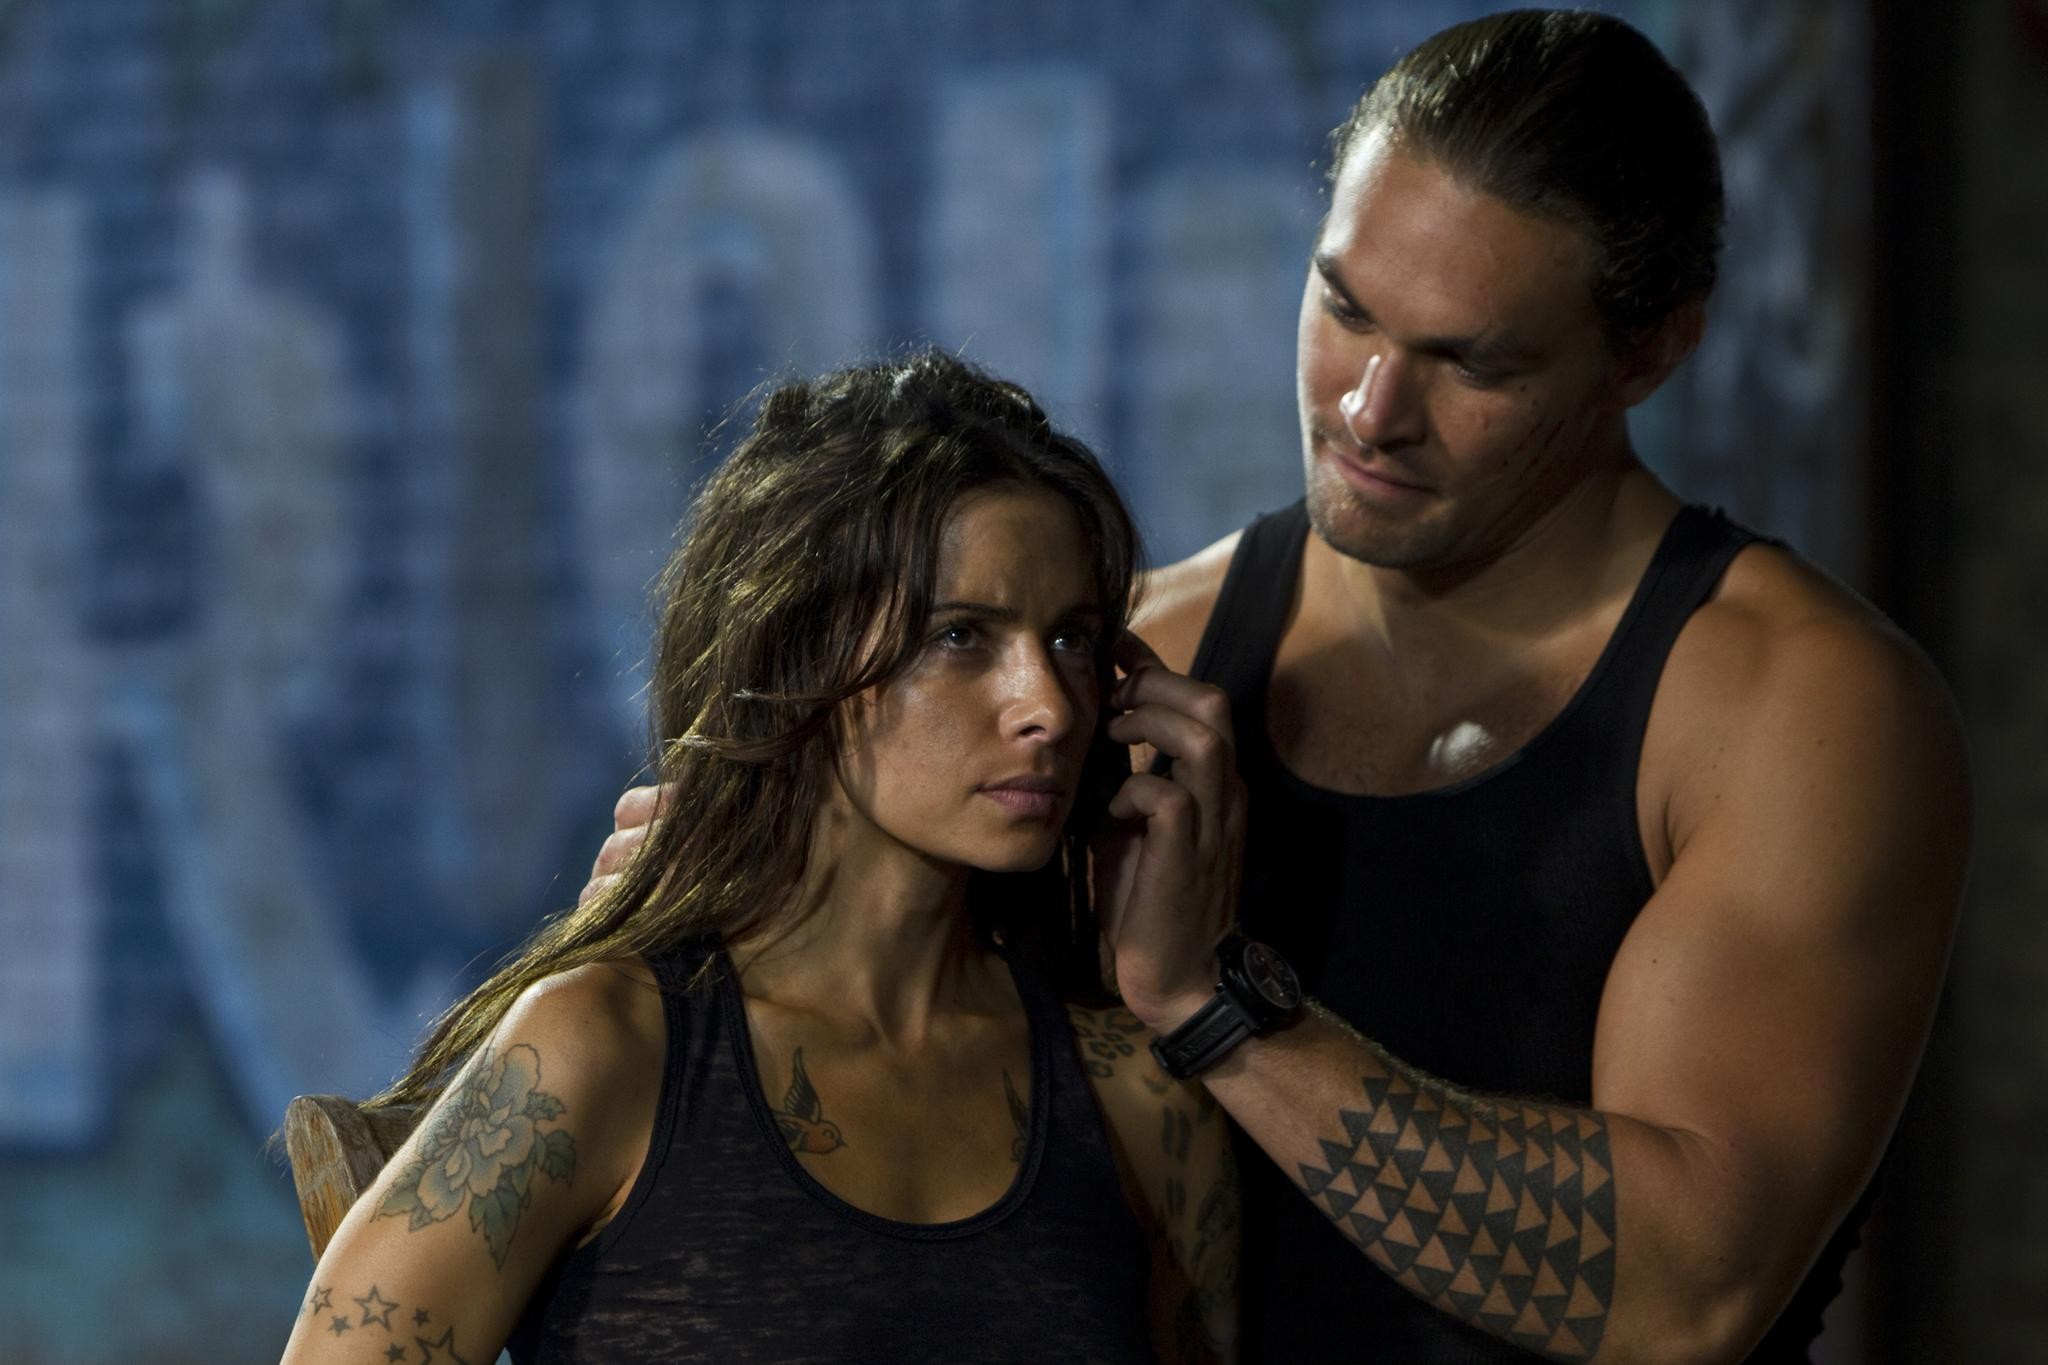 Sarah Shahi leaked nude pics with fake tattoos made during the Bullet in the Hea #75186760